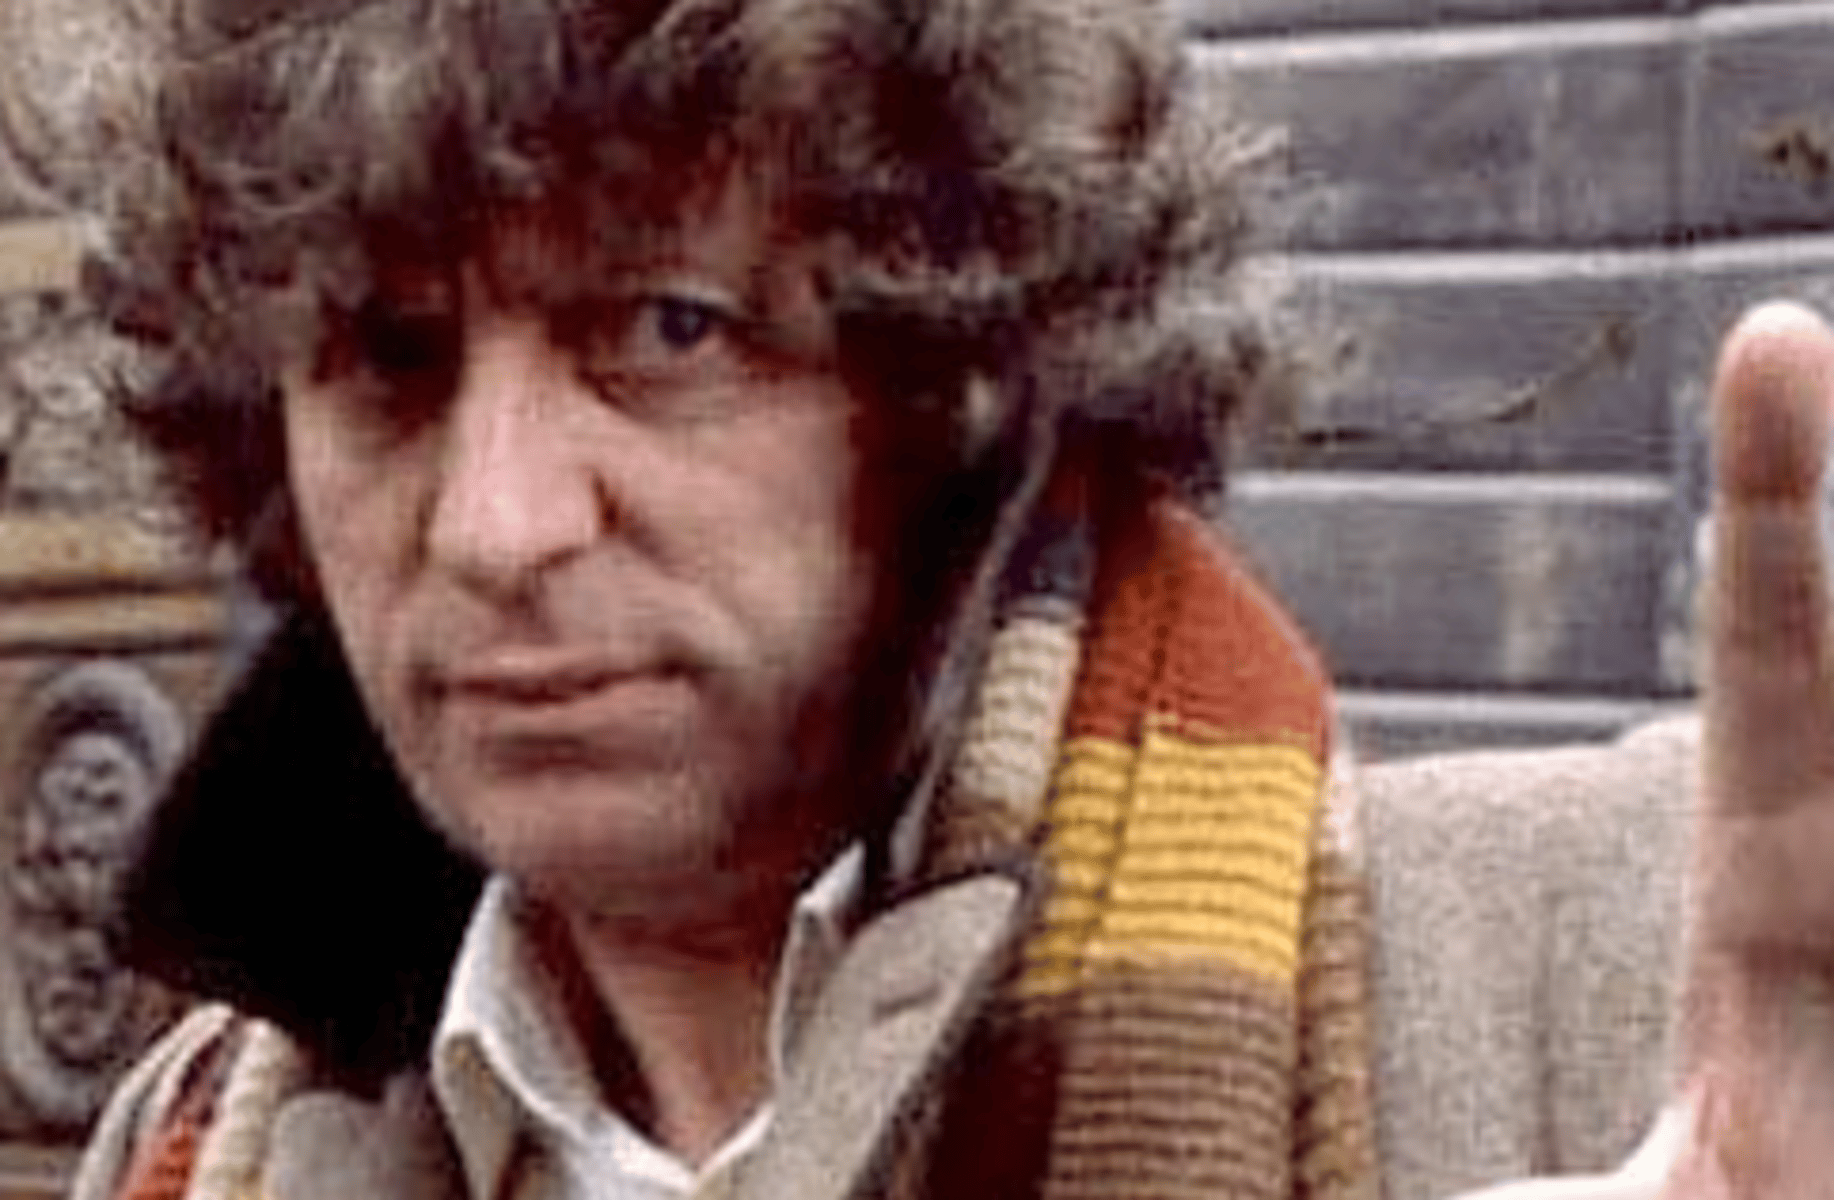 The 4th doctor who